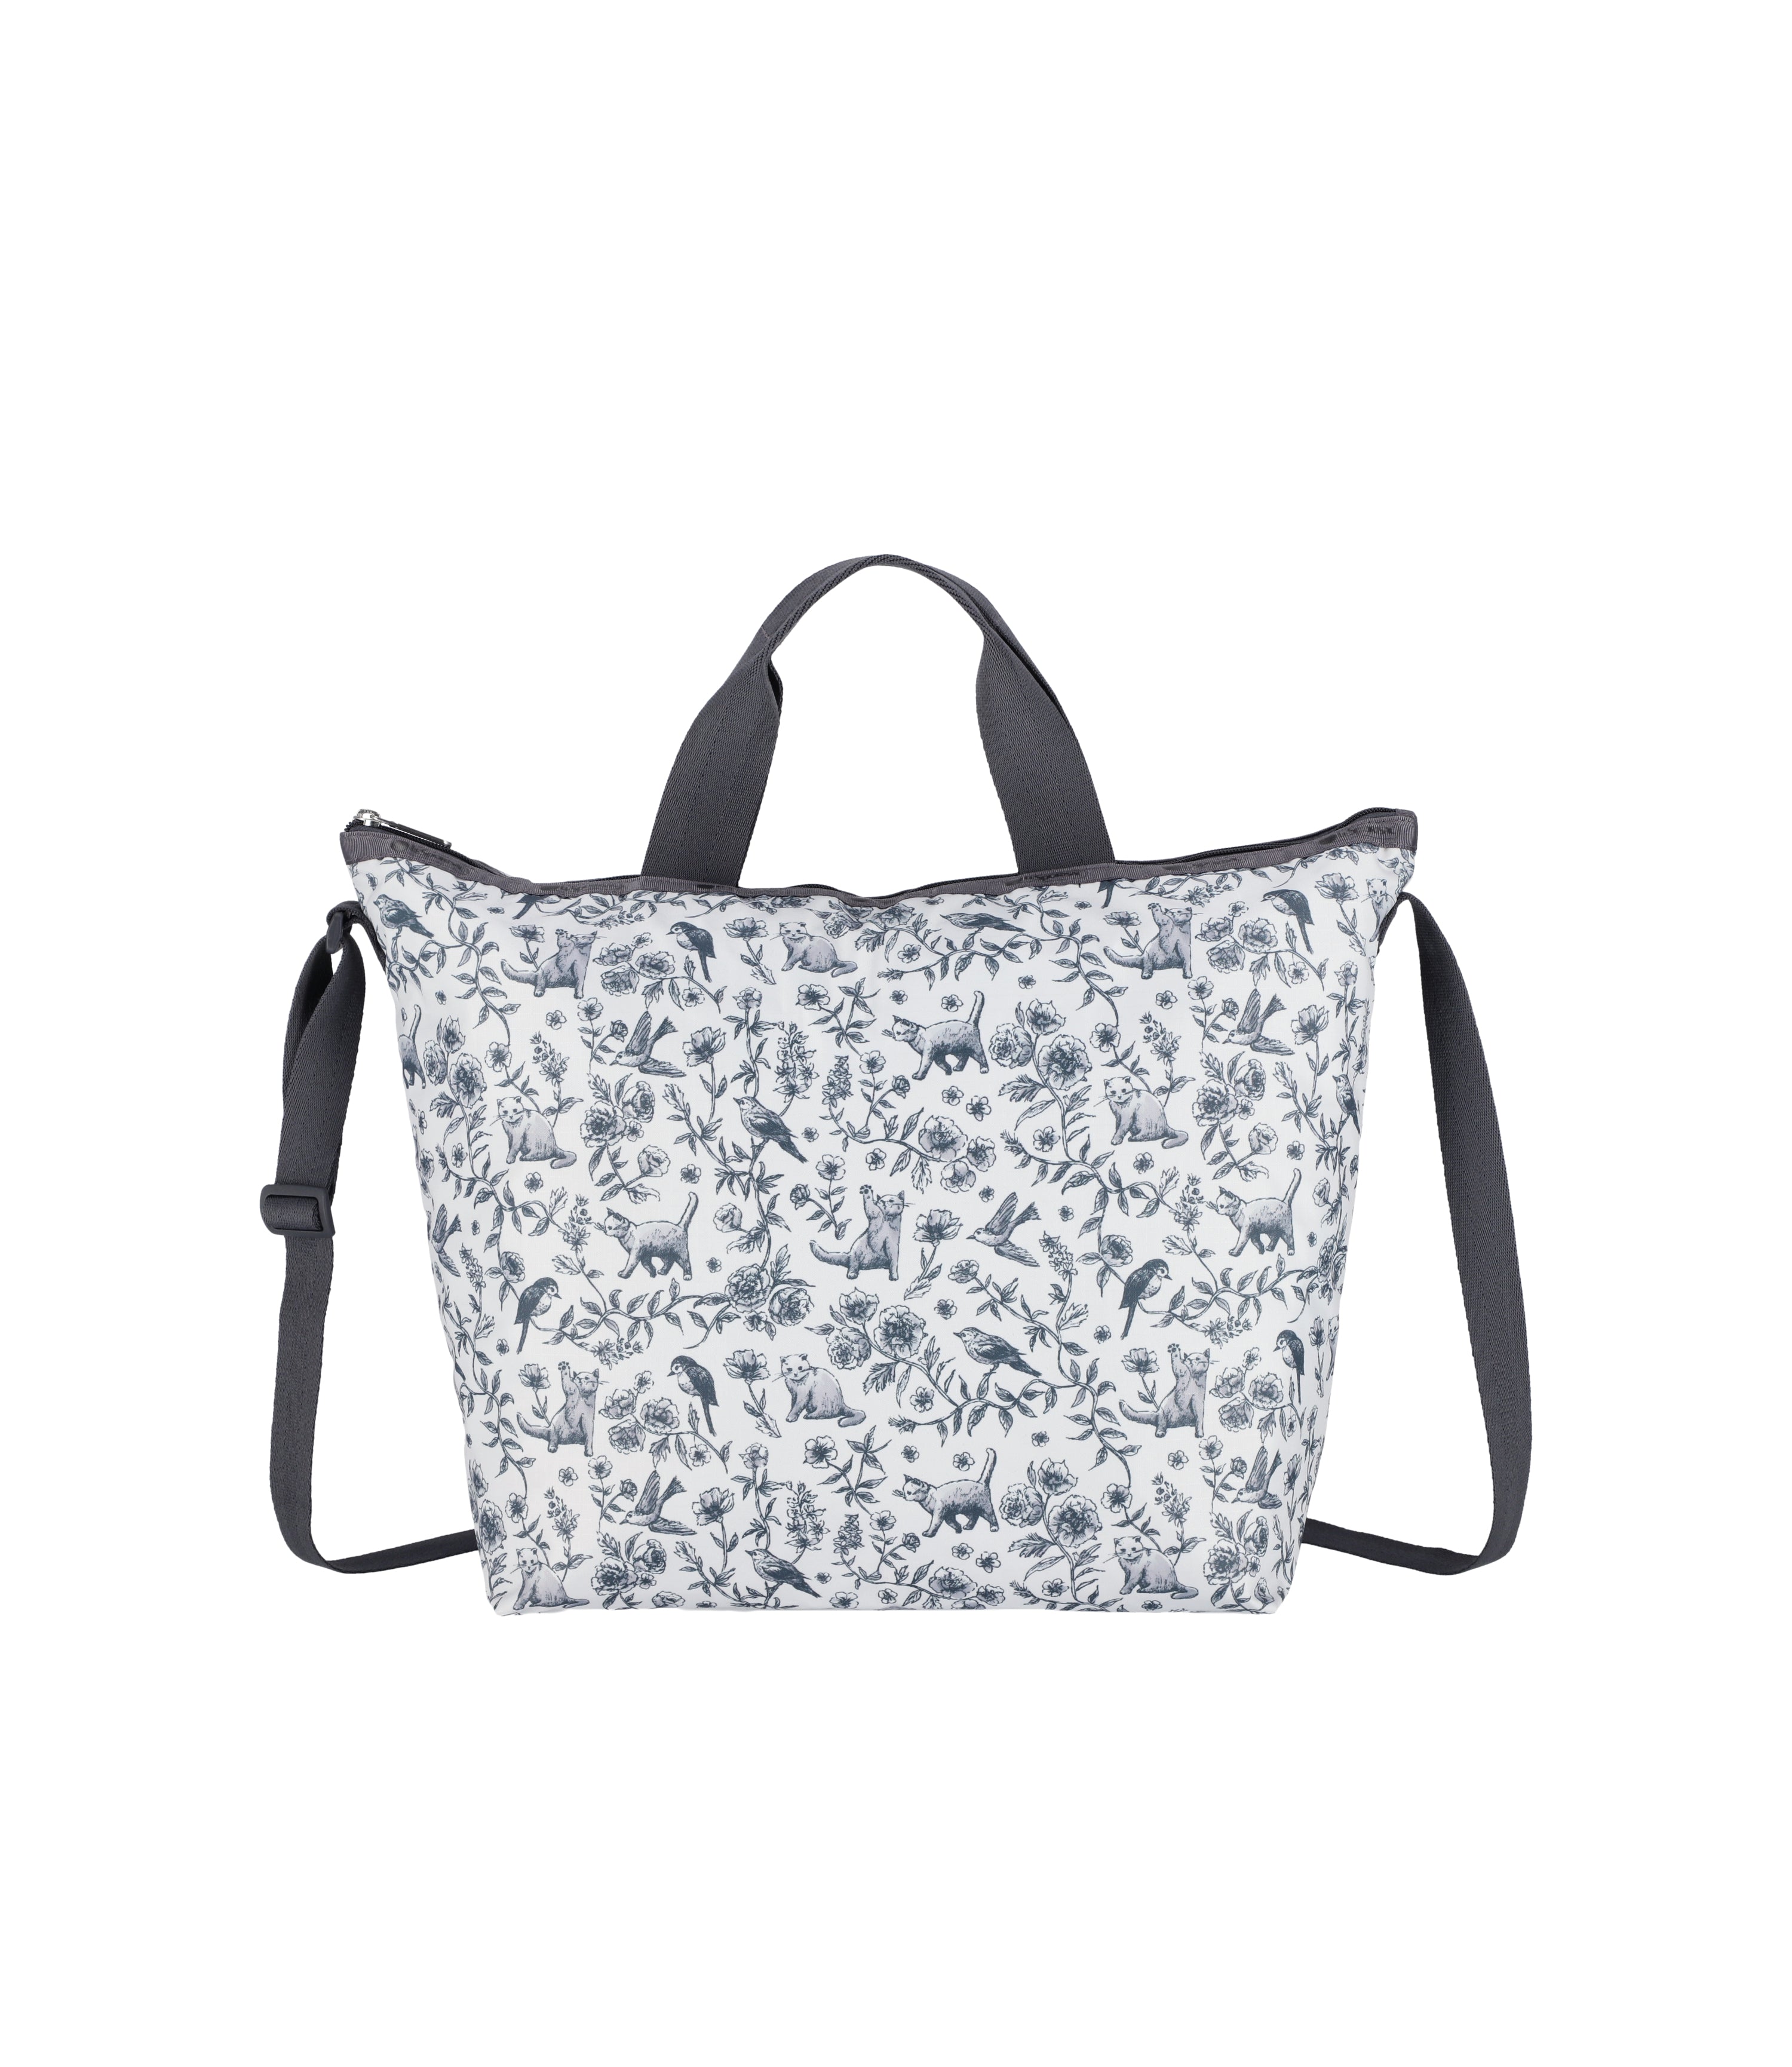 Deluxe Easy Carry Tote - Floral Birds and Cats print